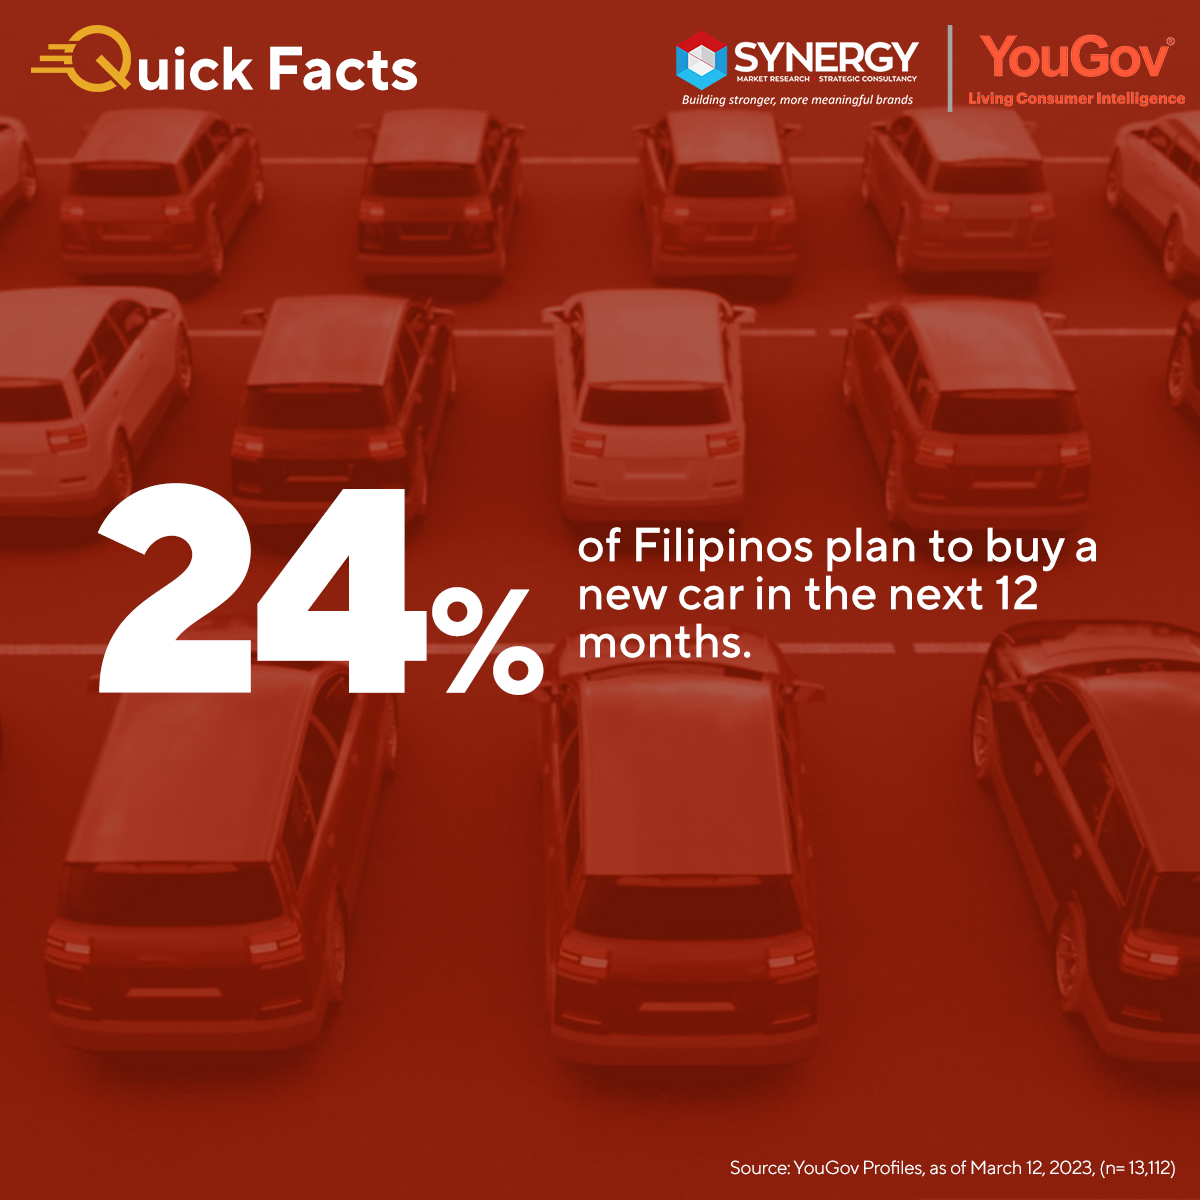 Quick Facts 2023 – Buying New Car